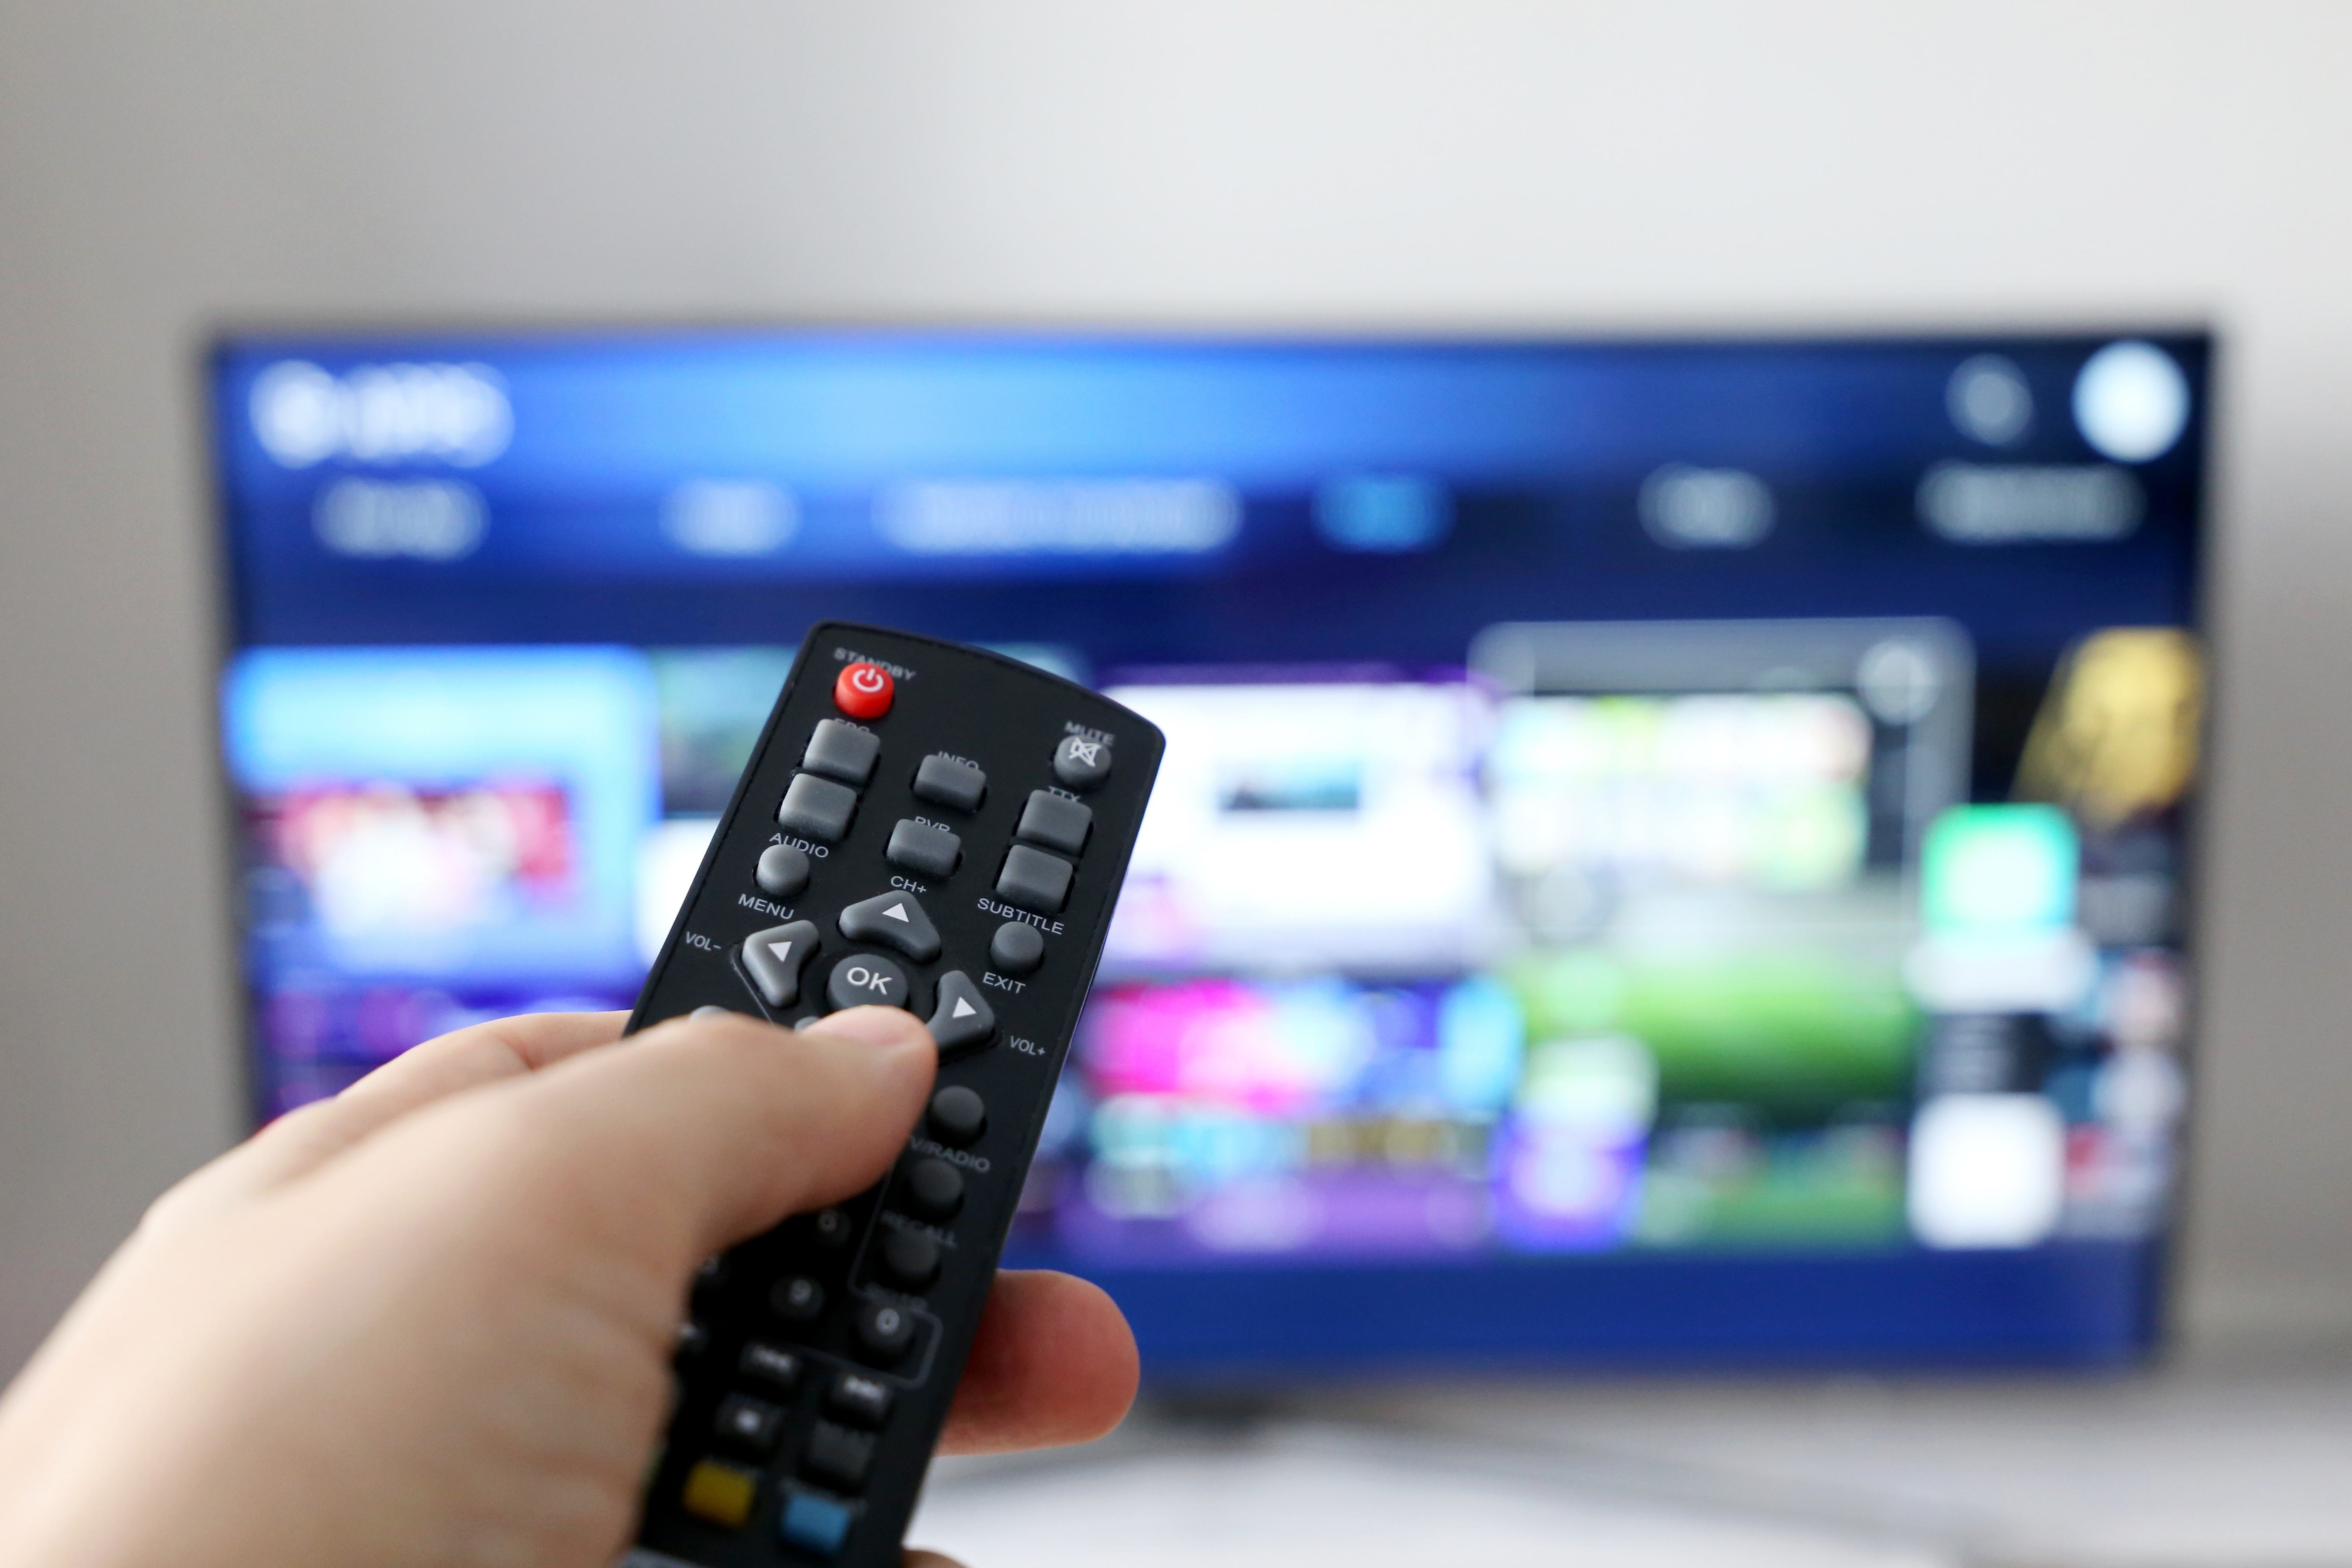 Survey: The Average Viewer Age 18-30 Uses 11 Video Streaming Services